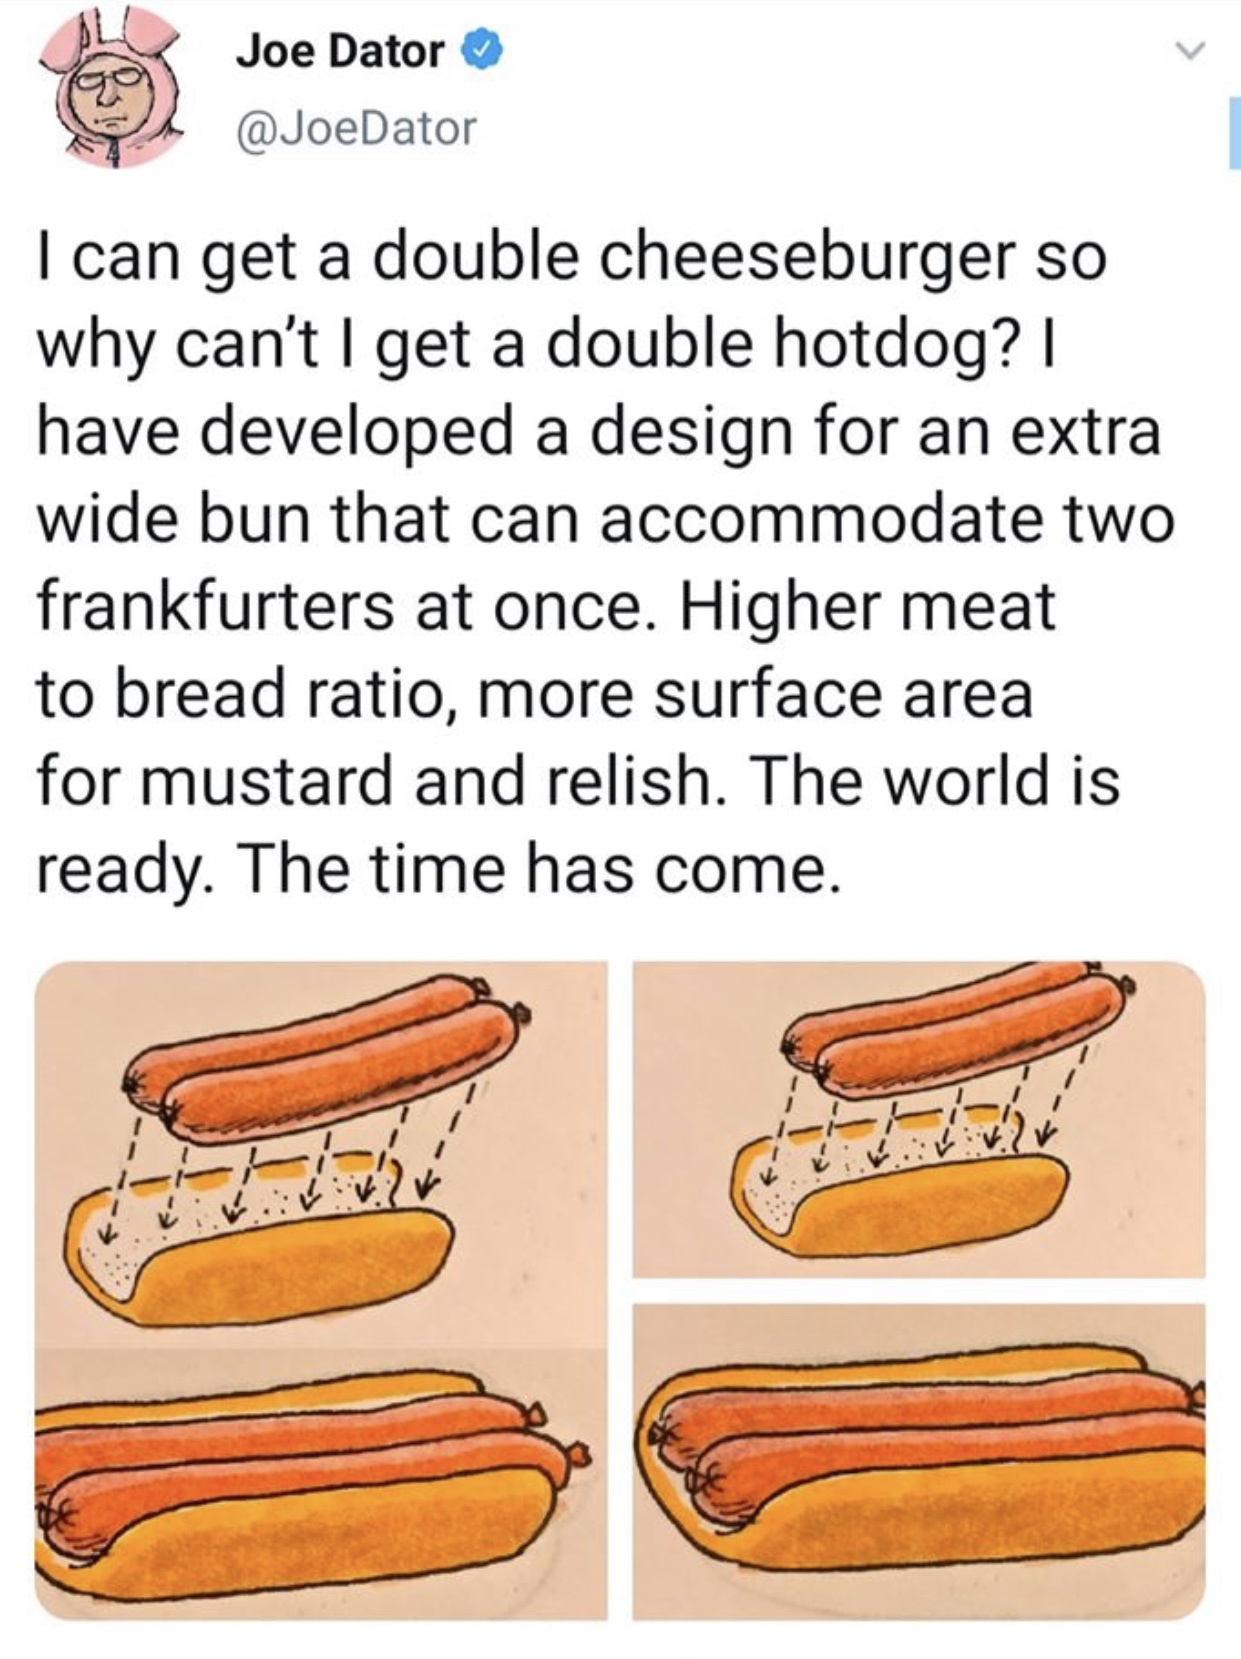 hot dog - Joe Dator I can get a double cheeseburger so why can't I get a double hotdog? have developed a design for an extra wide bun that can accommodate two frankfurters at once. Higher meat to bread ratio, more surface area for mustard and relish. The 